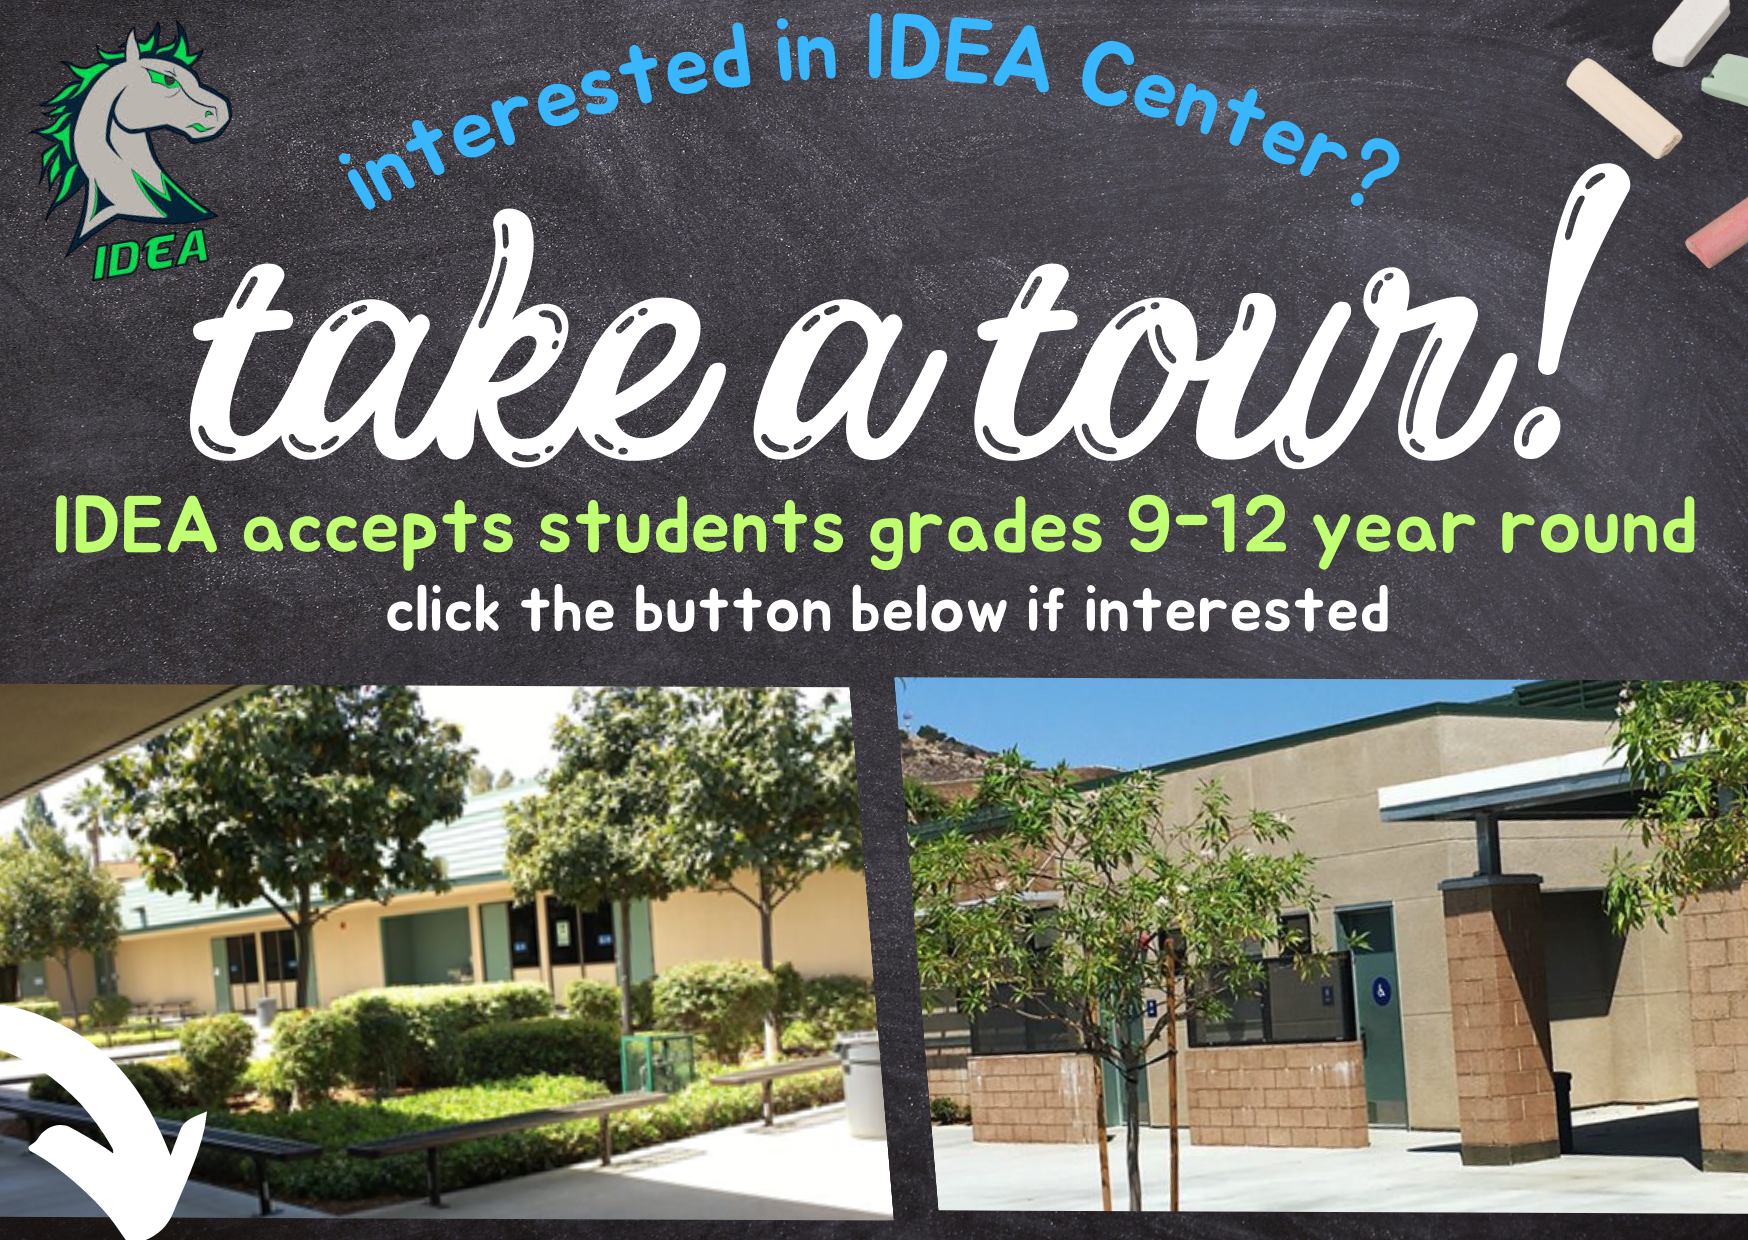 Interested in IDEA Center? Schedule a tour! We accept students year round and are a public high school